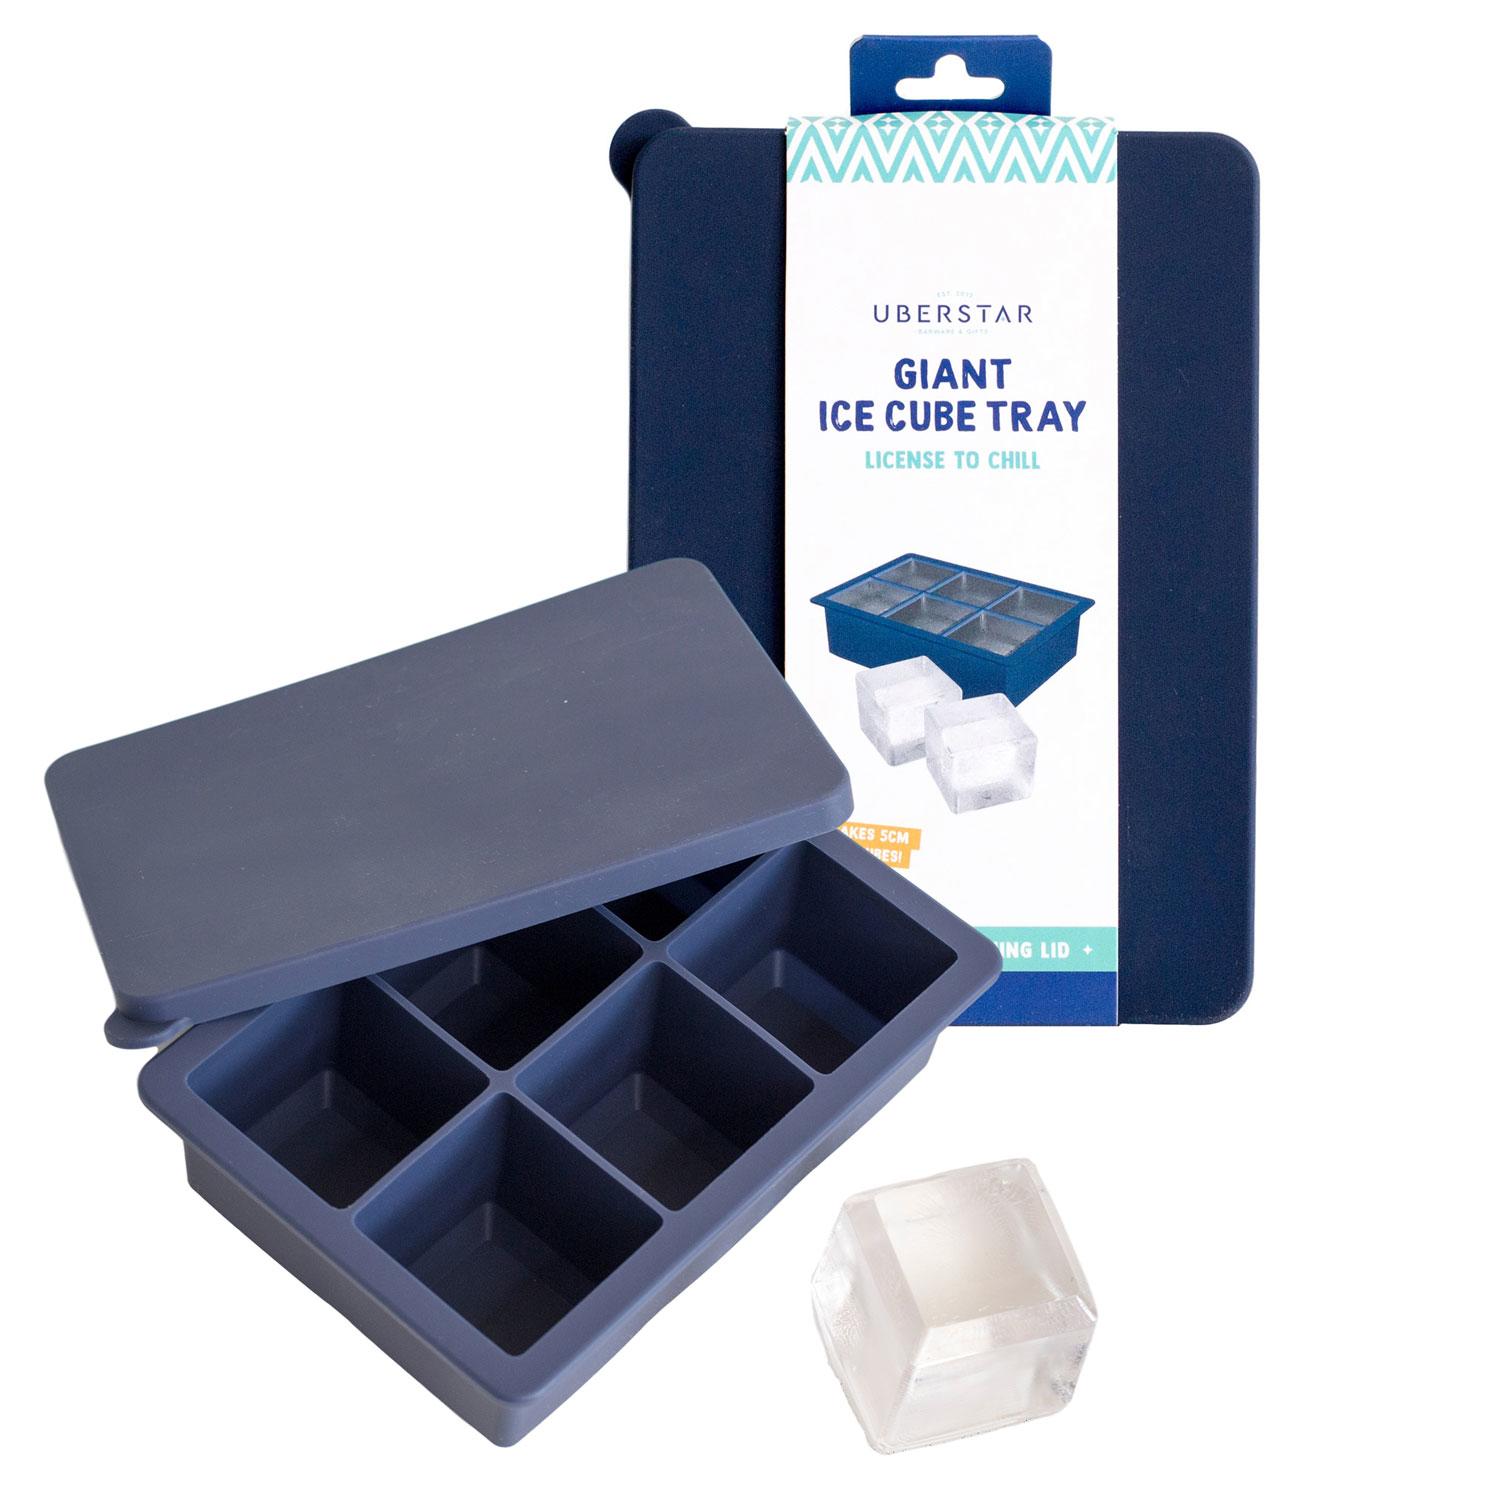 Uberstar Giant Ice Cube Tray - Only £8.99